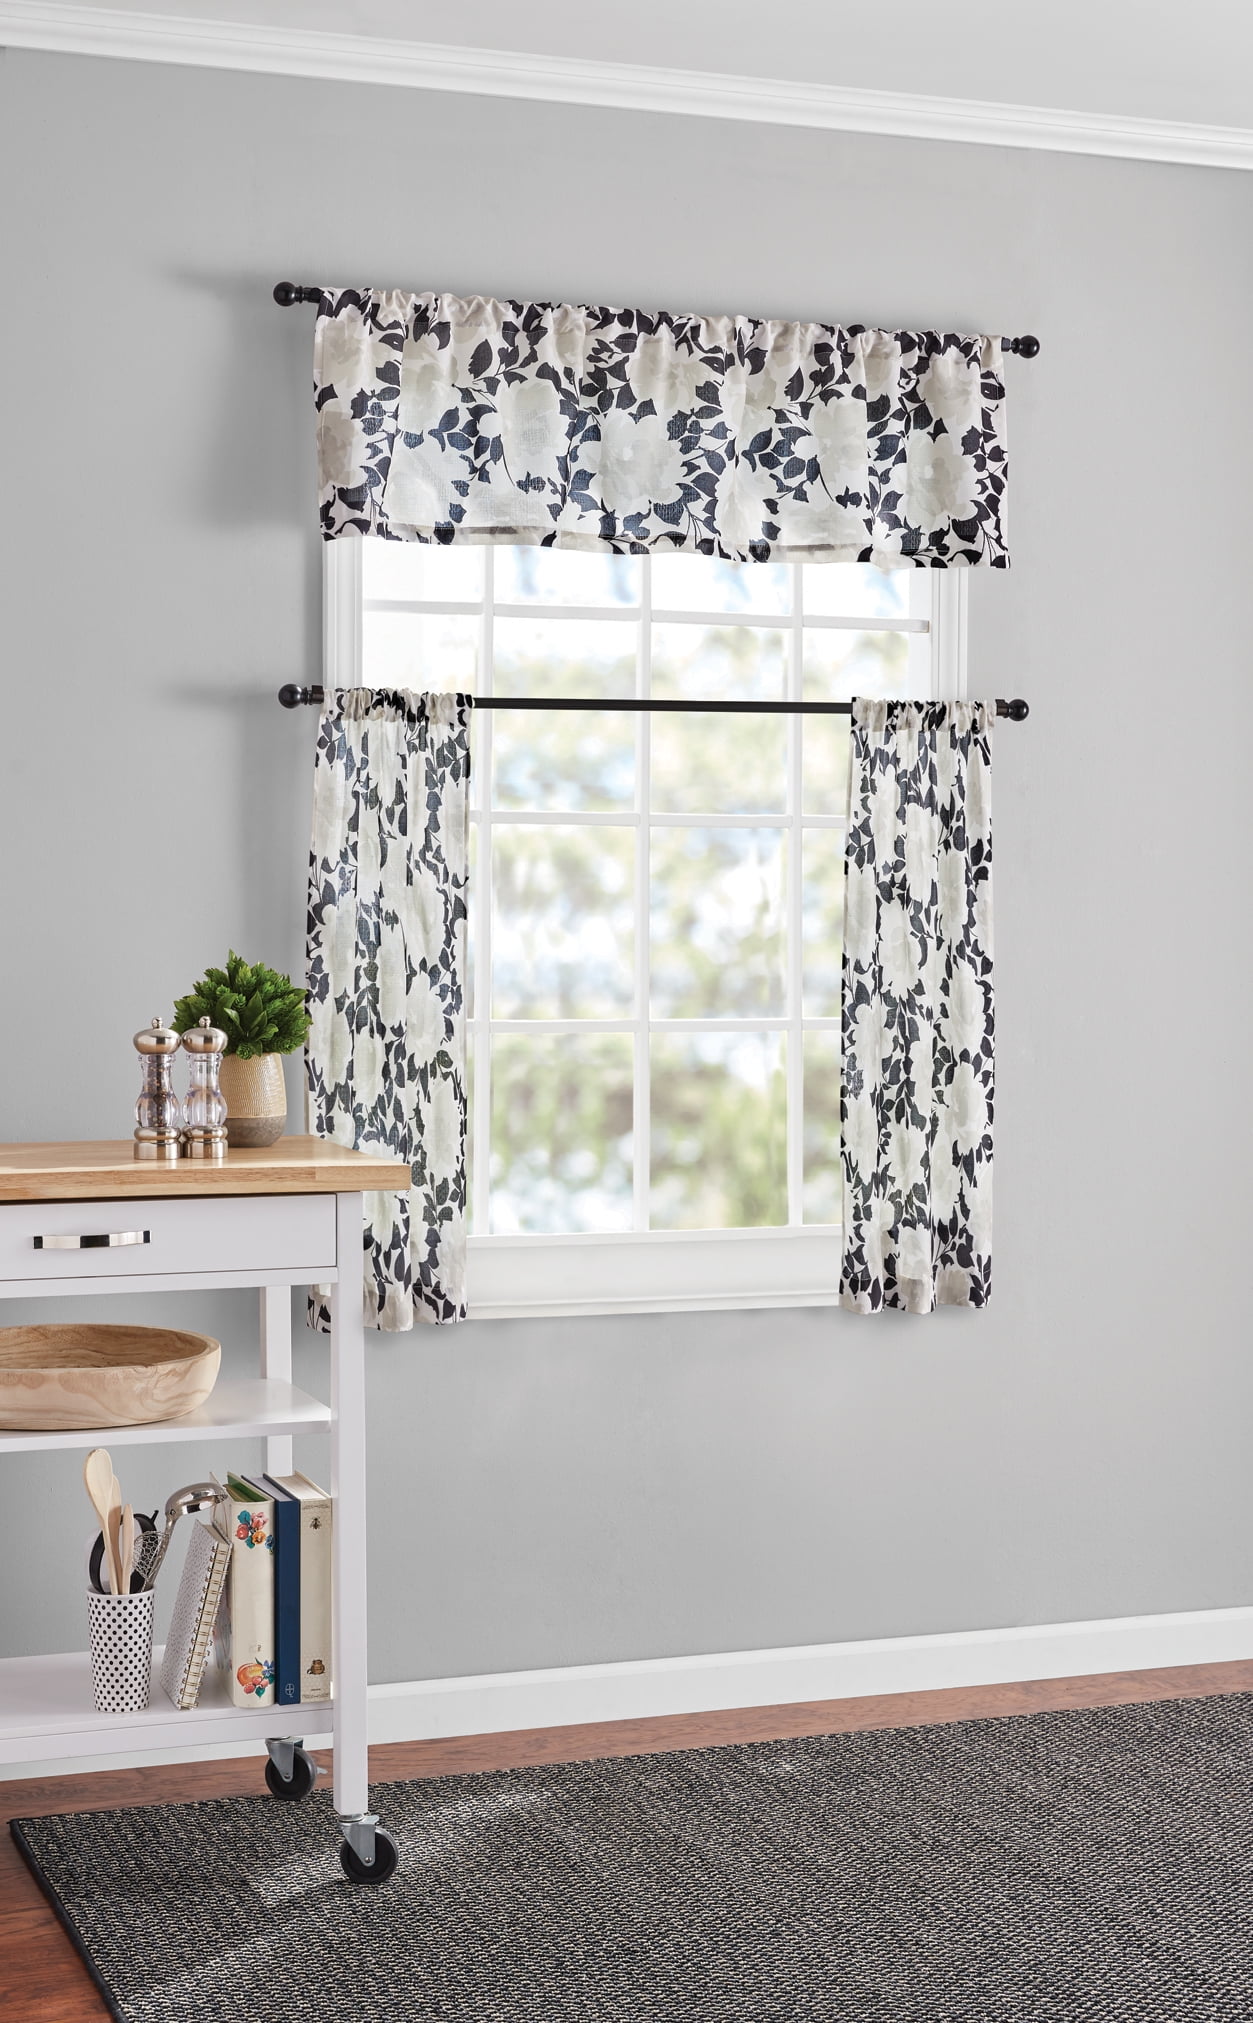 Blue JUJOLY Mangnolia Blue Flower Floral Semi Sheer 3 Pieces Rod Pocket Kitchen Window Curtain Set with 2 Tiers 26”x24” Each and 1 Valance 52”x14” 